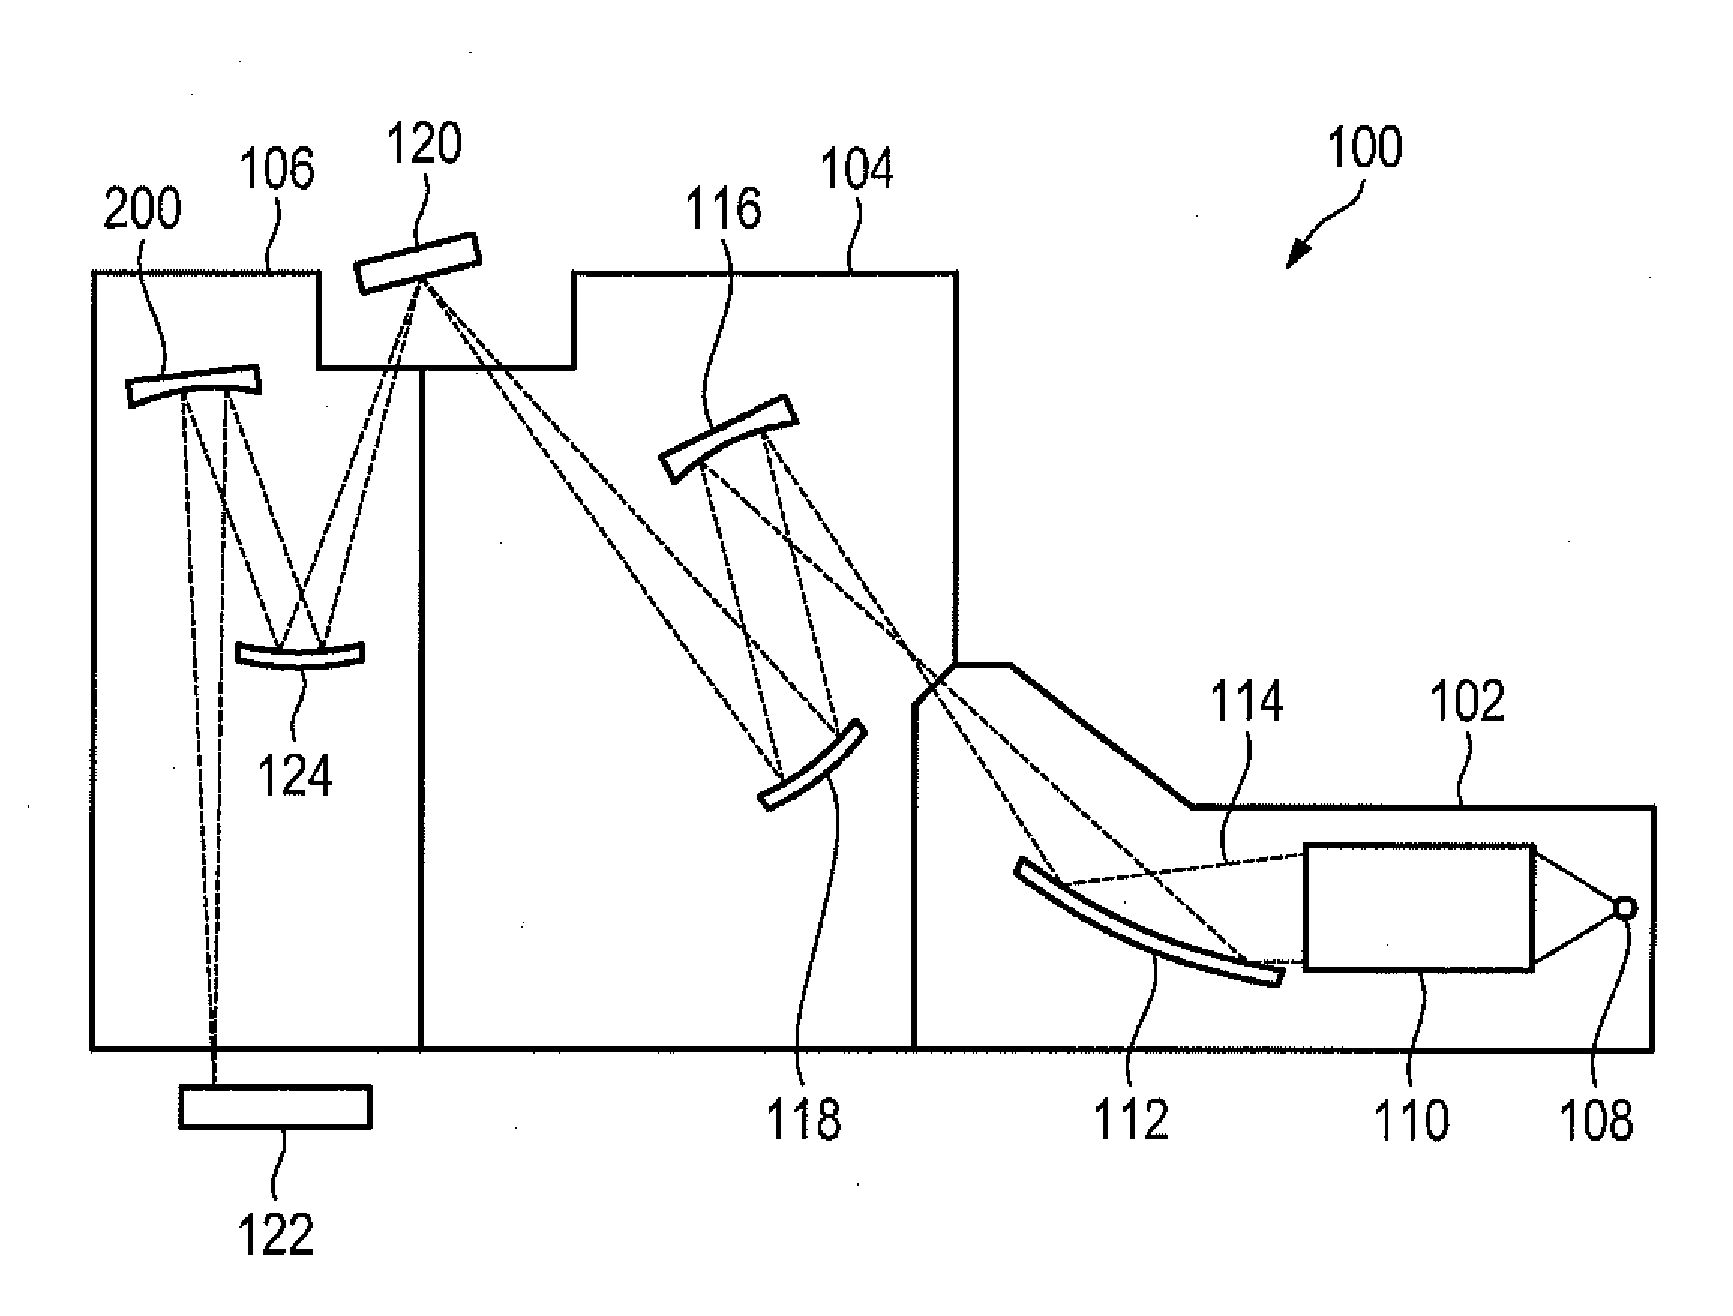 Lithography apparatus and method for producing a mirror arrangement